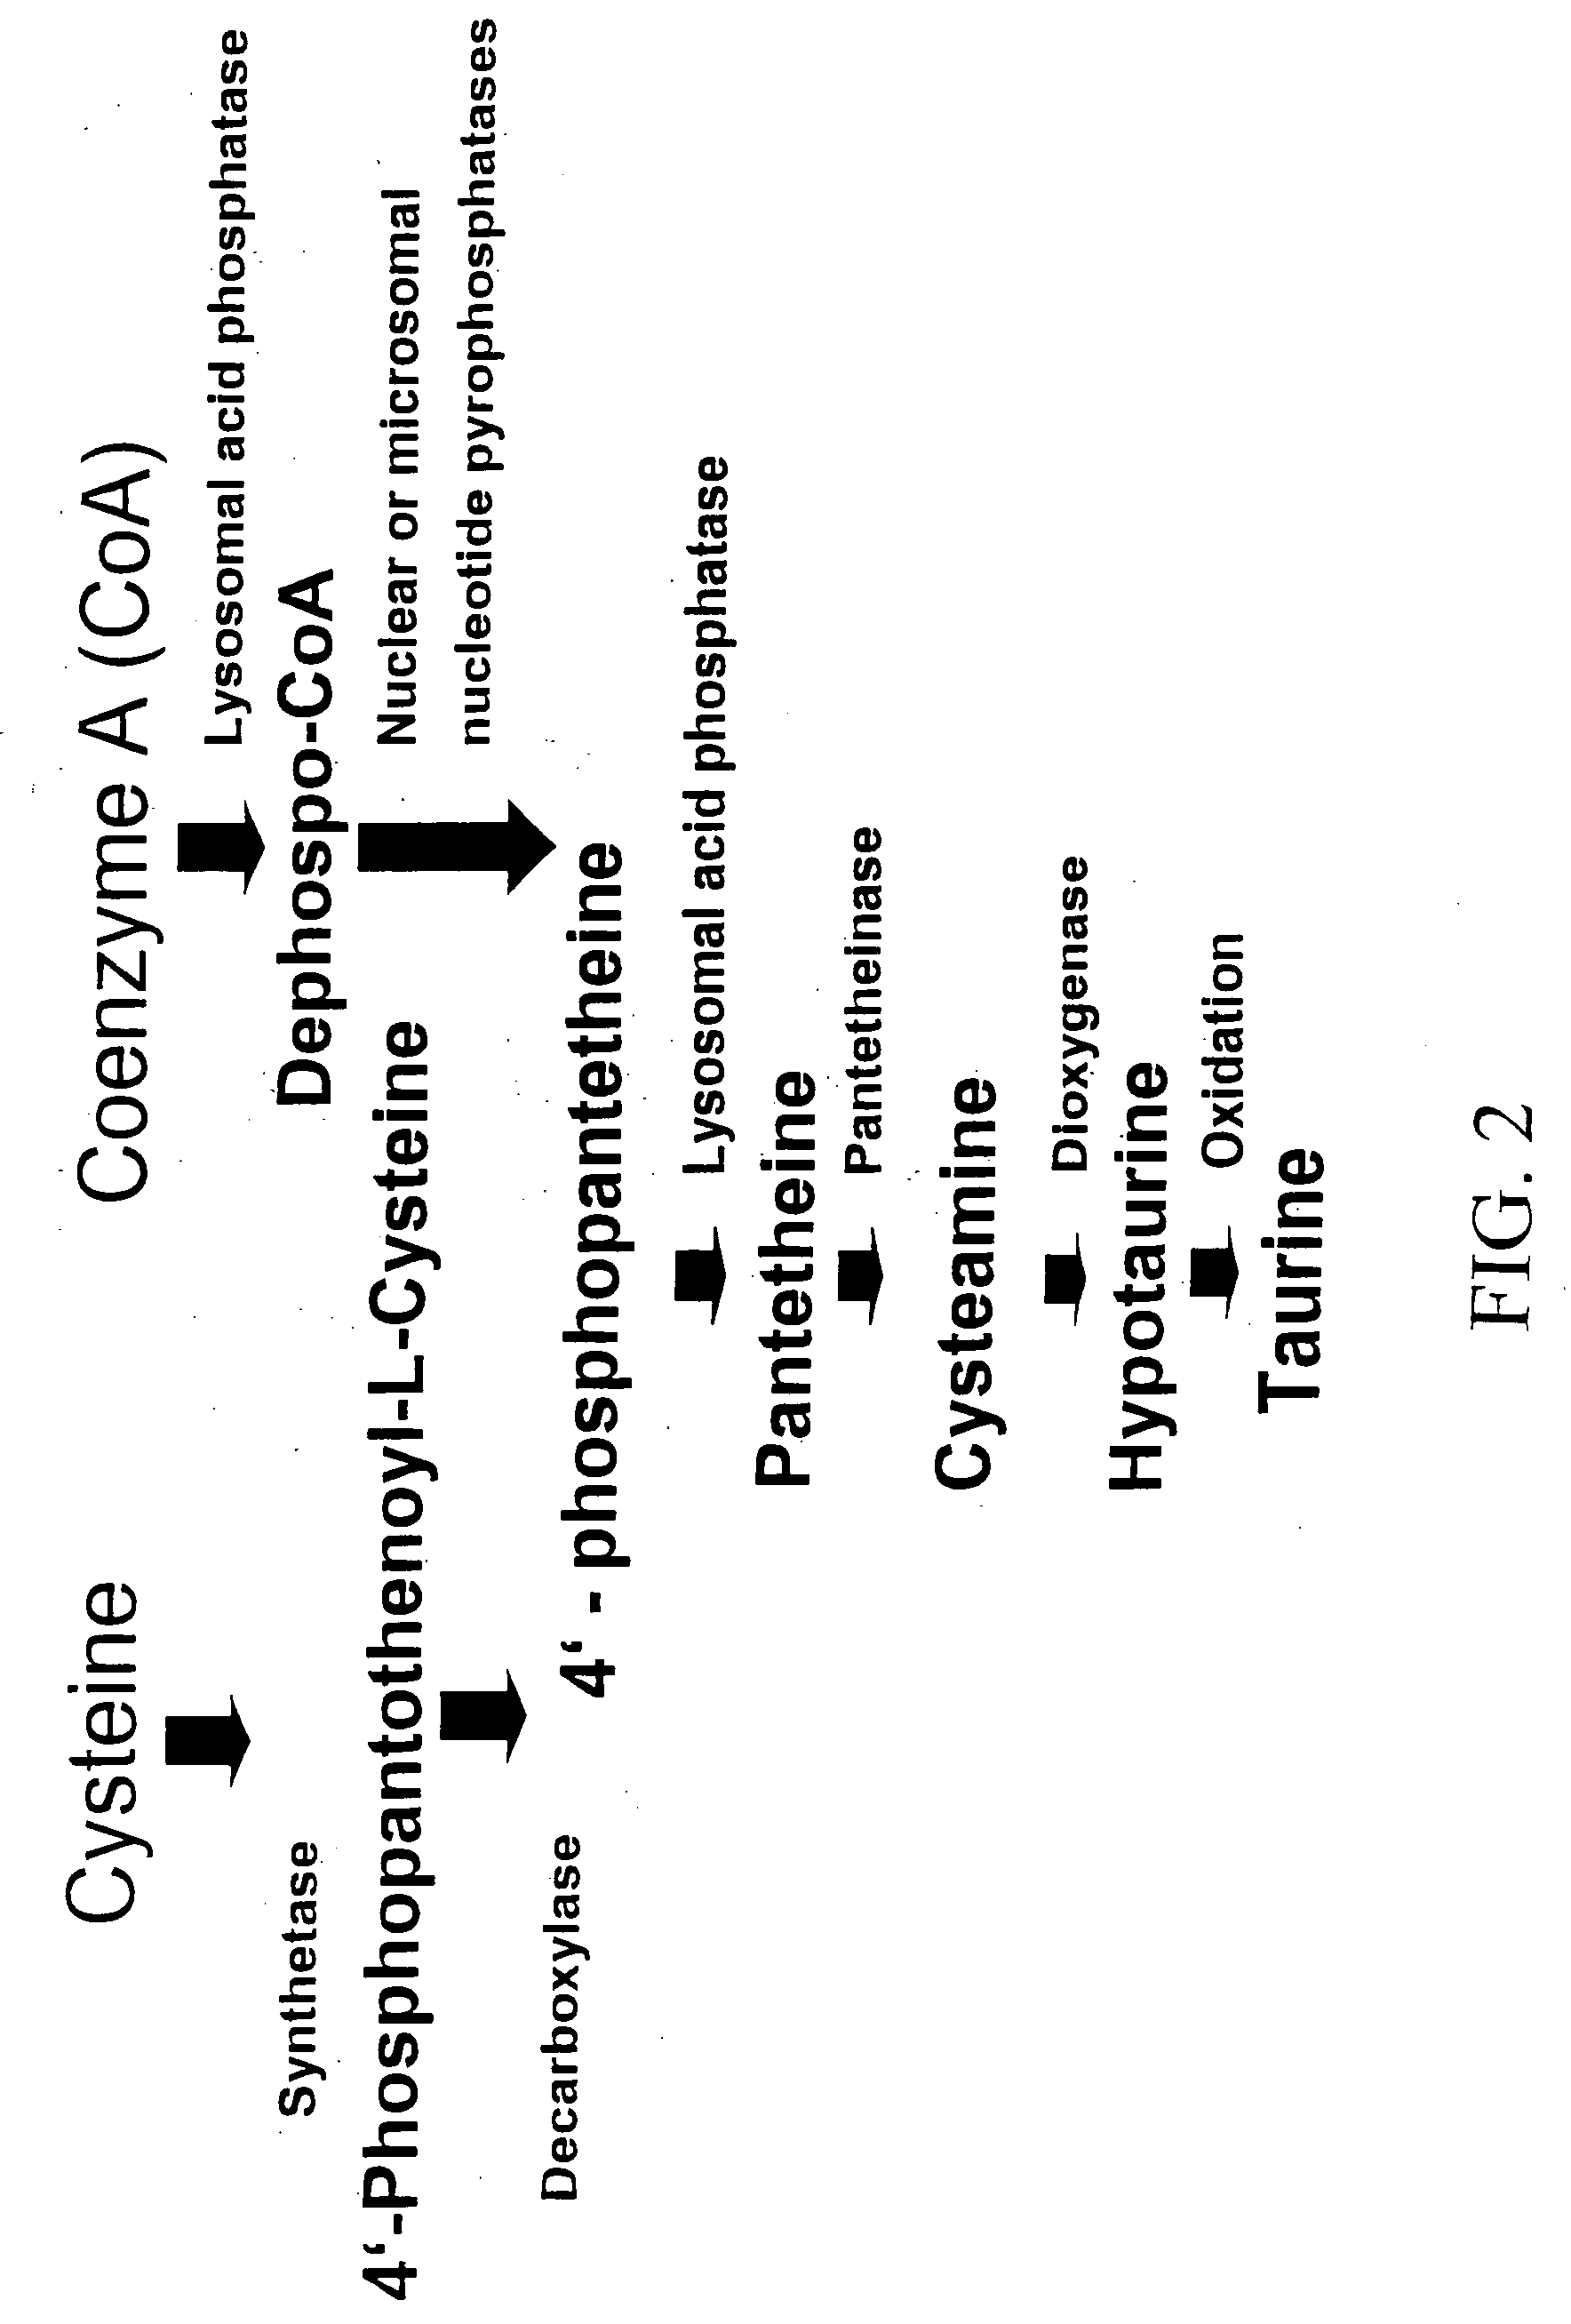 Materials and methods for modulating metabolism